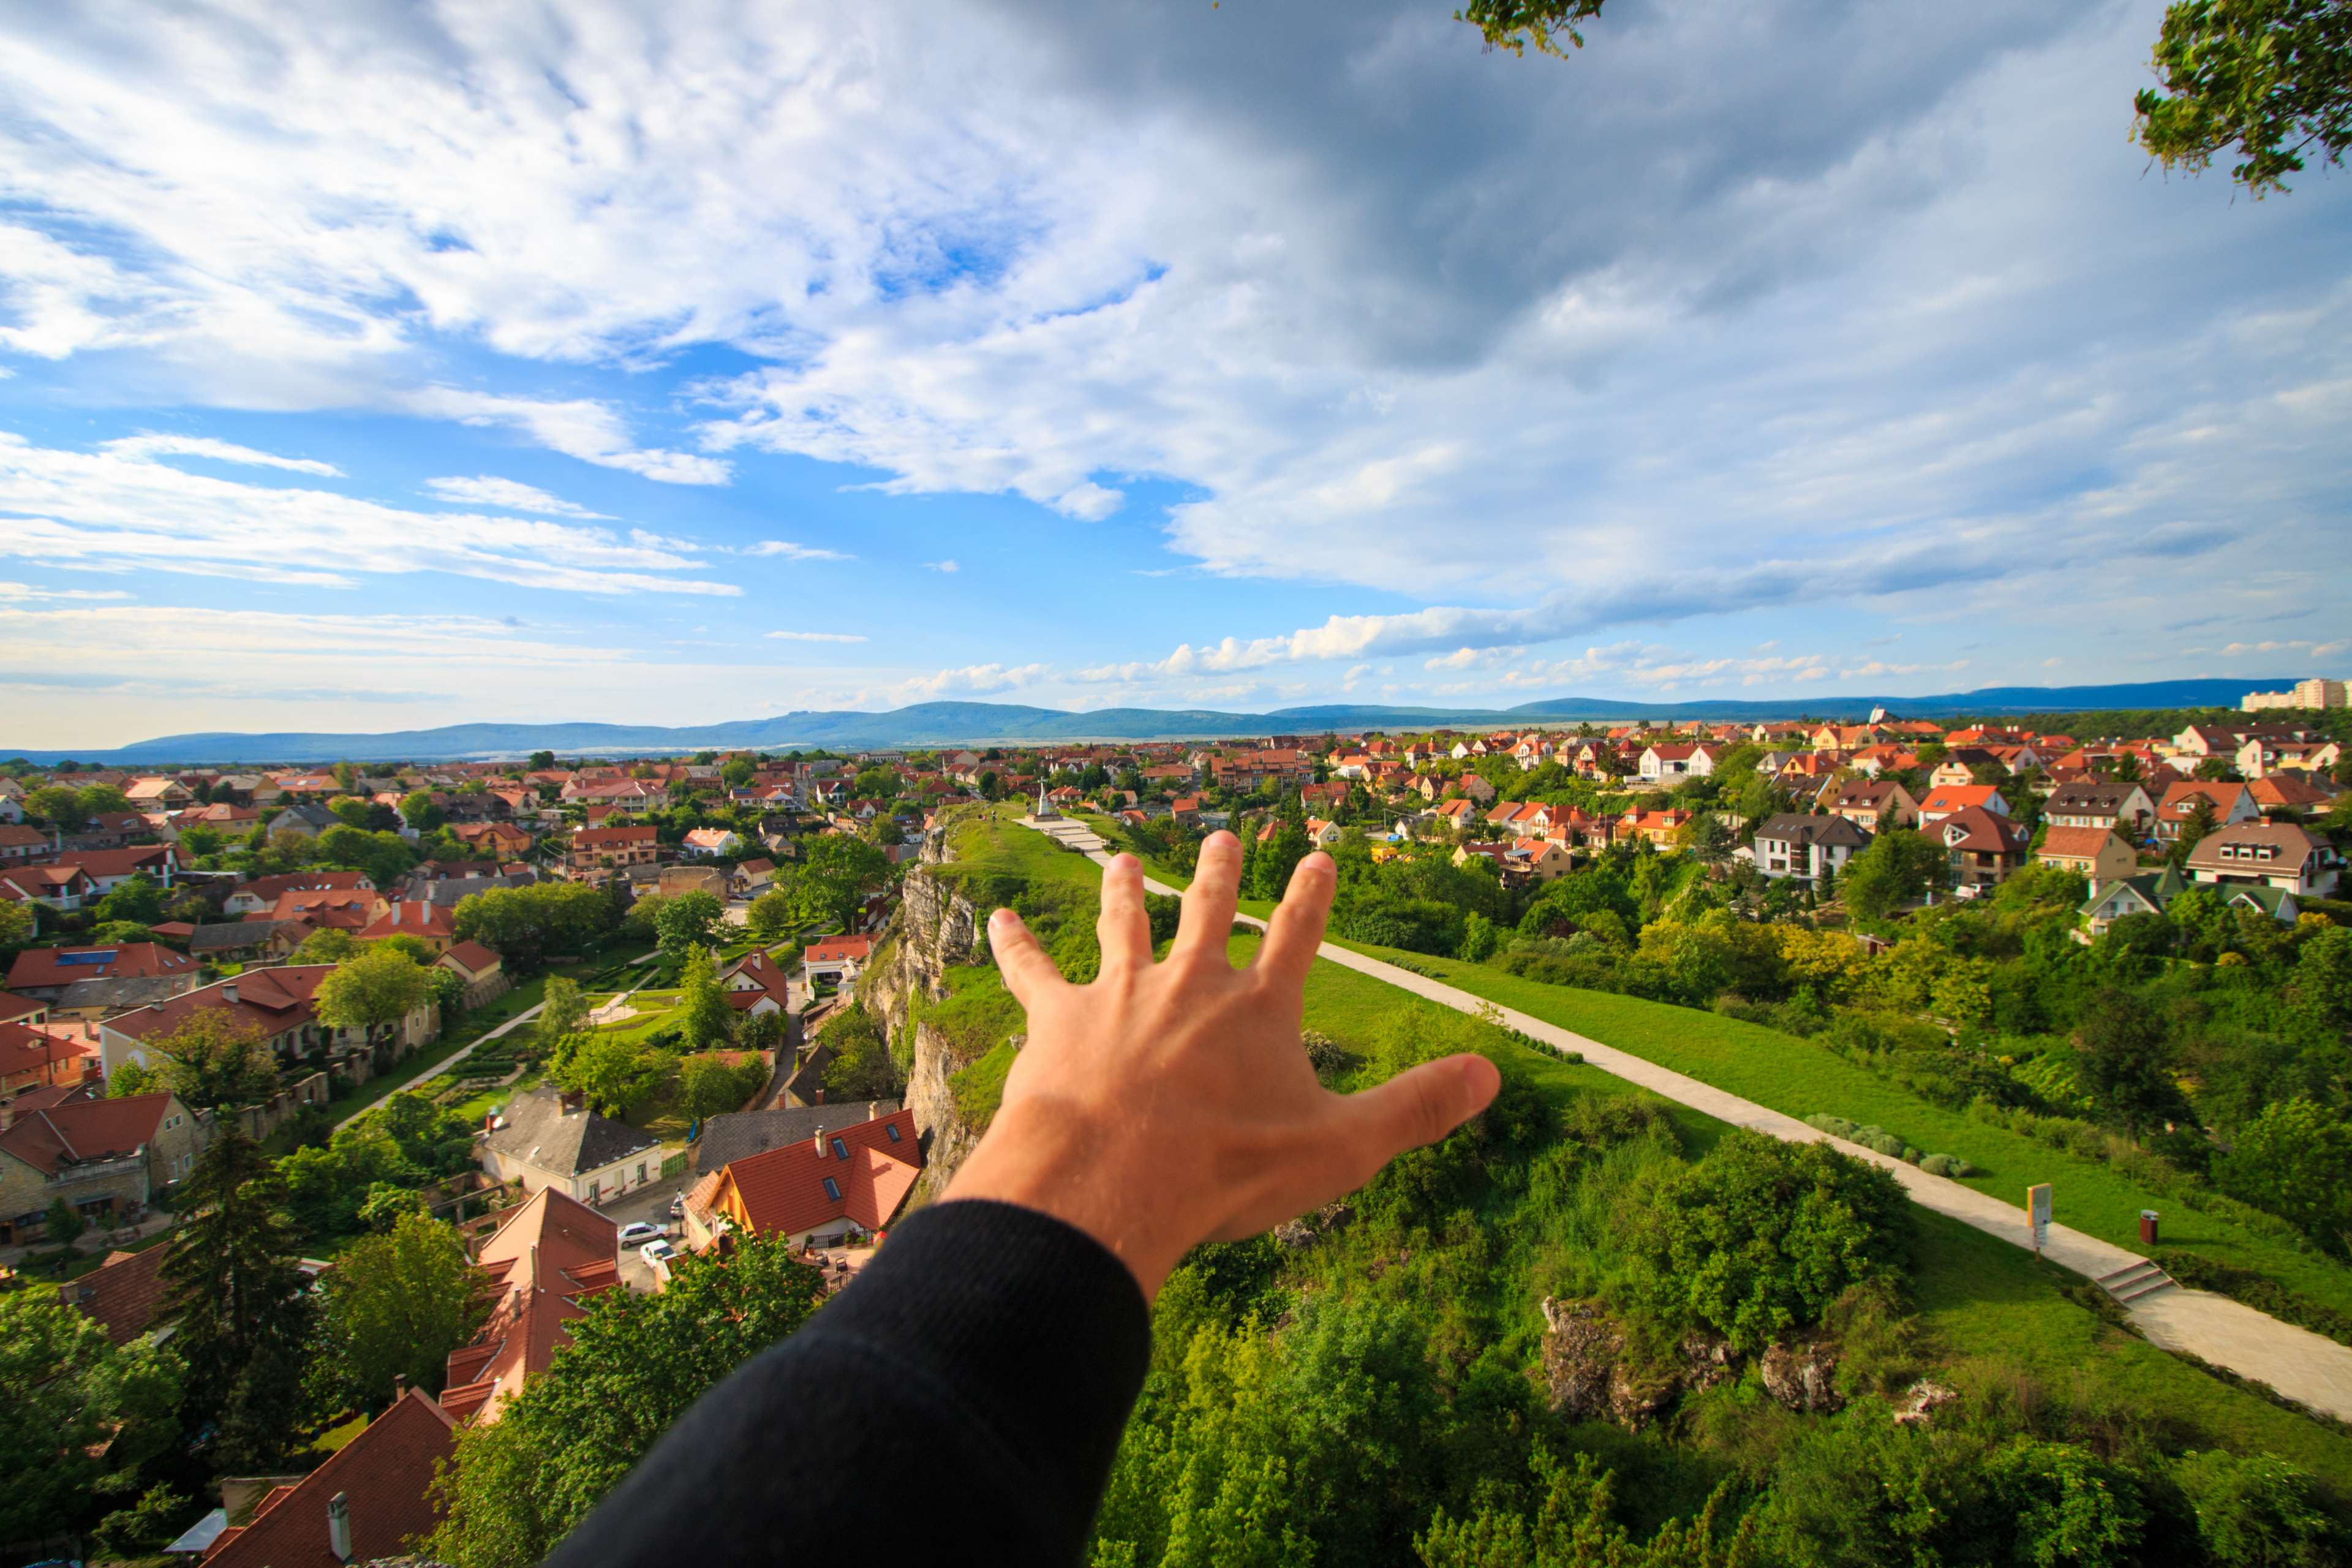 architecture, city, clouds, countryside, grass, green, hand